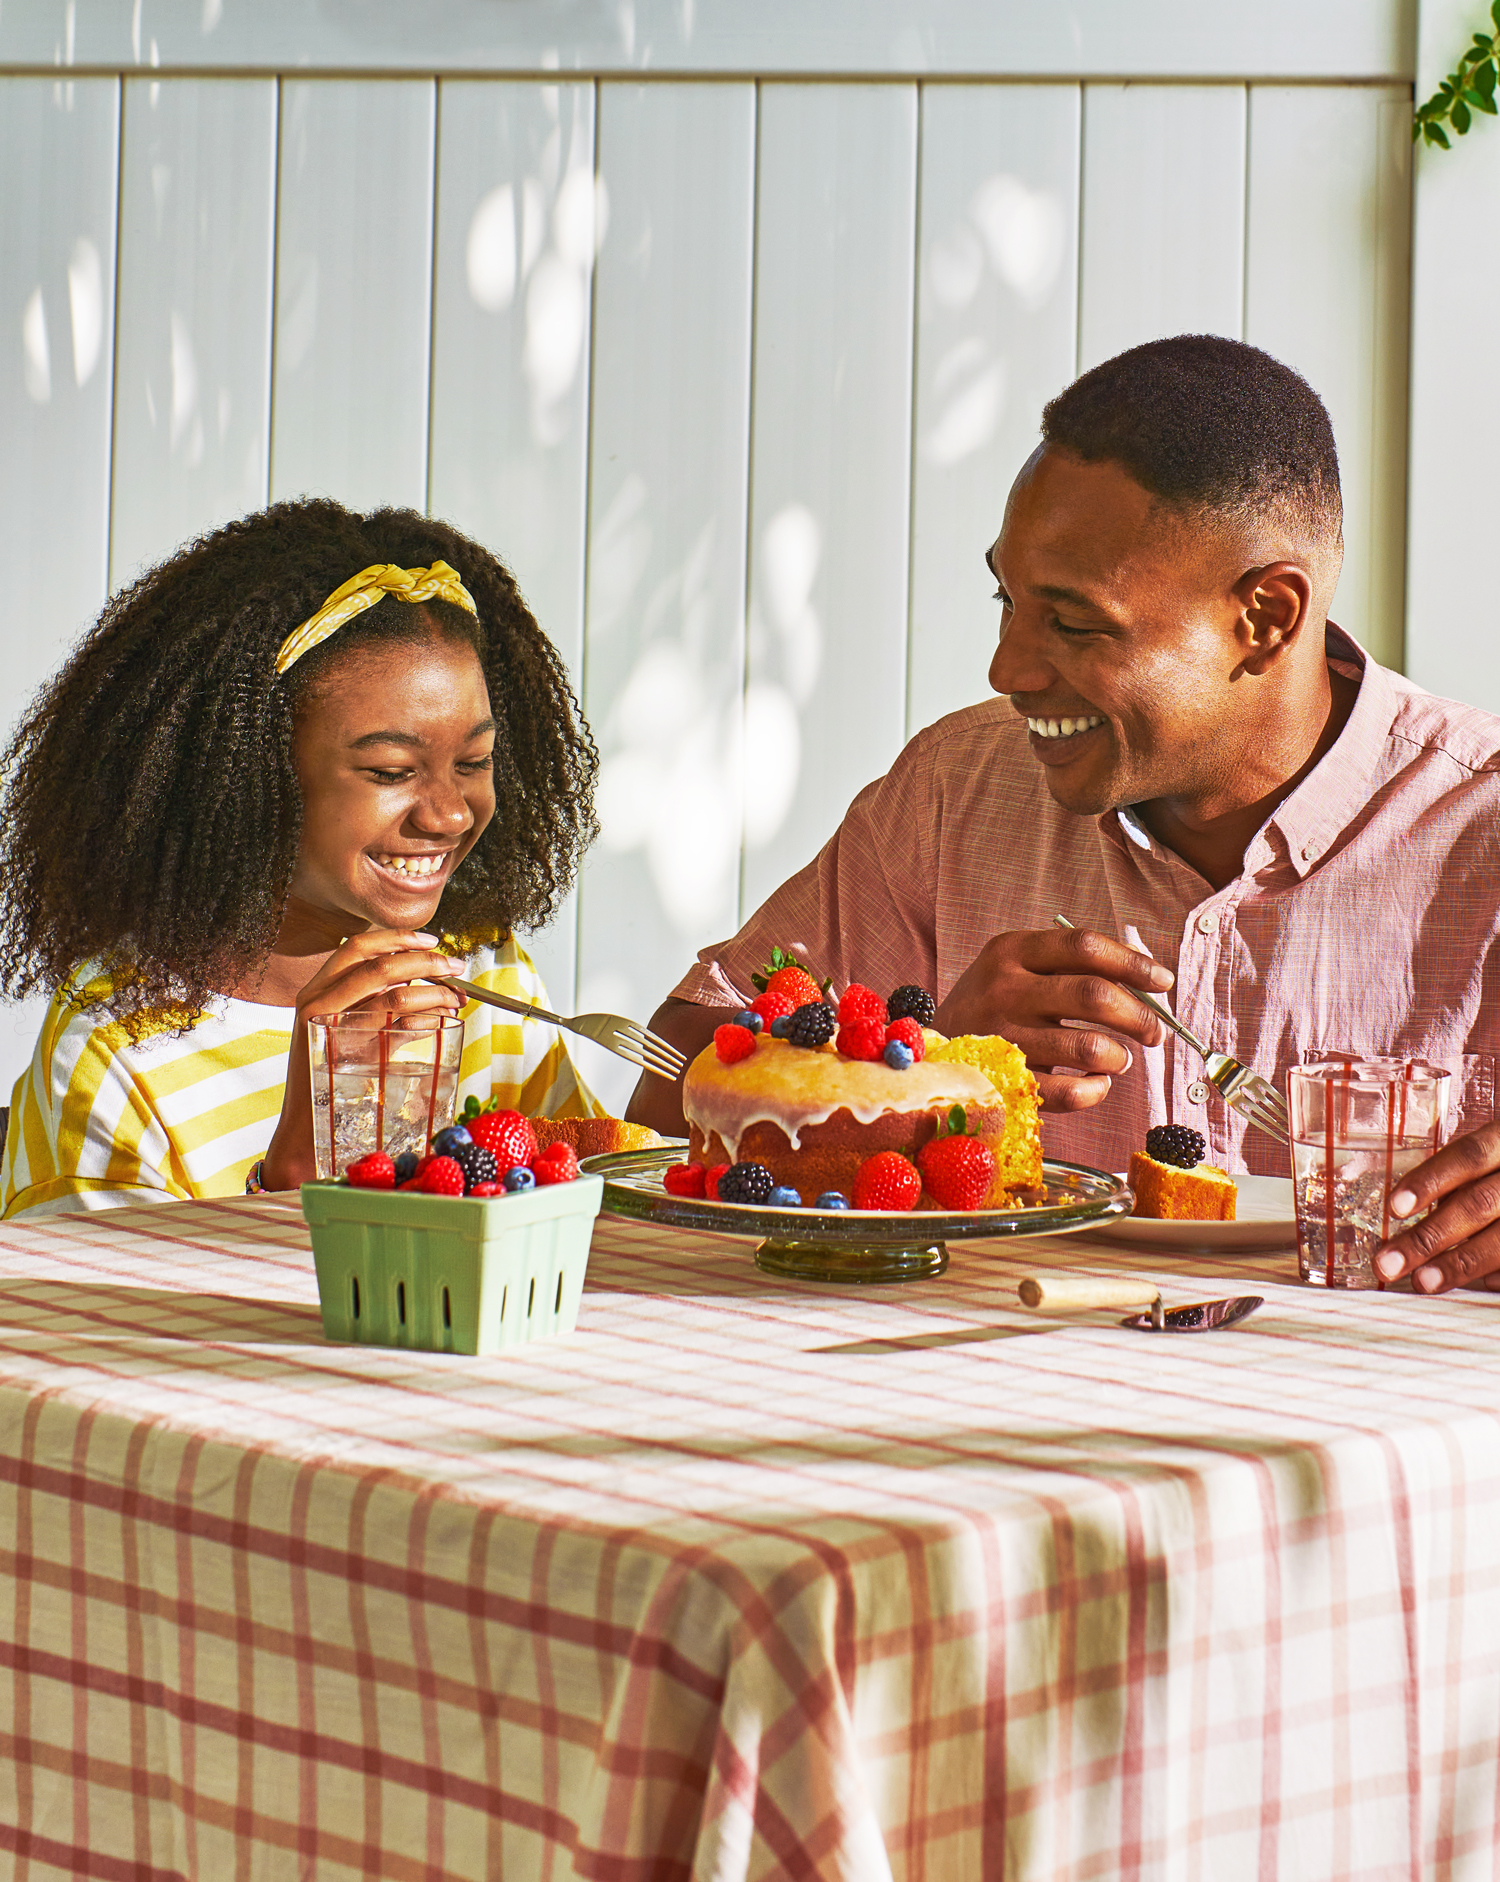 Image of a man and girl at a table smiling with a mixed pound cake with fresh strawberries, raspberries, blueberries, and blackberries.